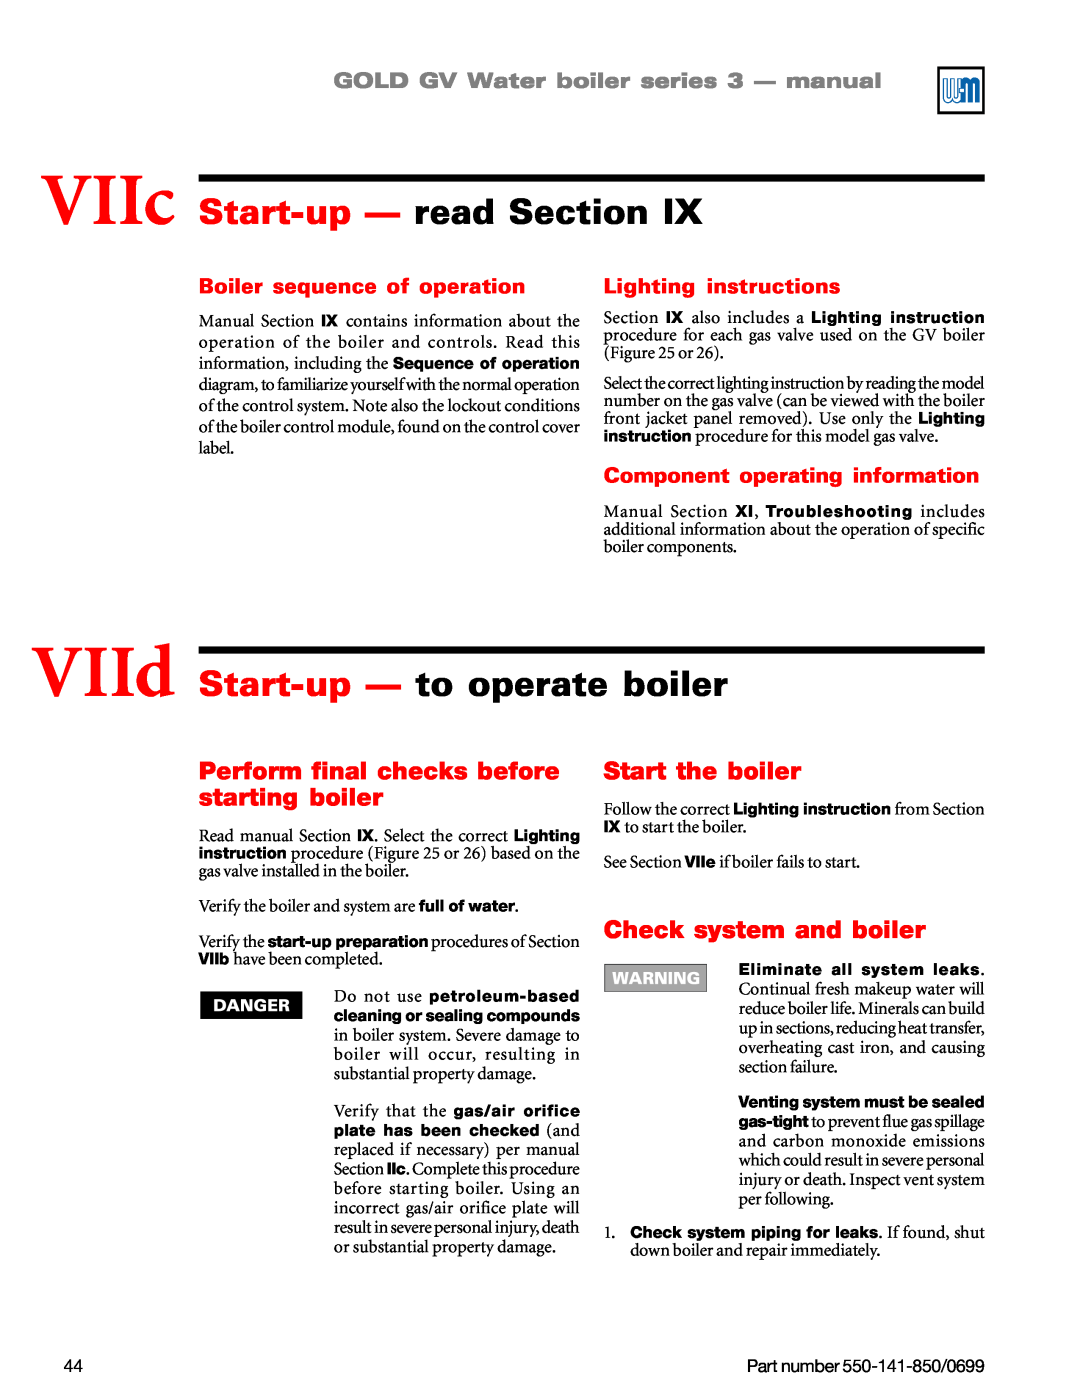 Weil-McLain GOLD DV WATER BOILER manual VIIc Start-up— read Section, VIId Start-up— to operate boiler, Start the boiler 